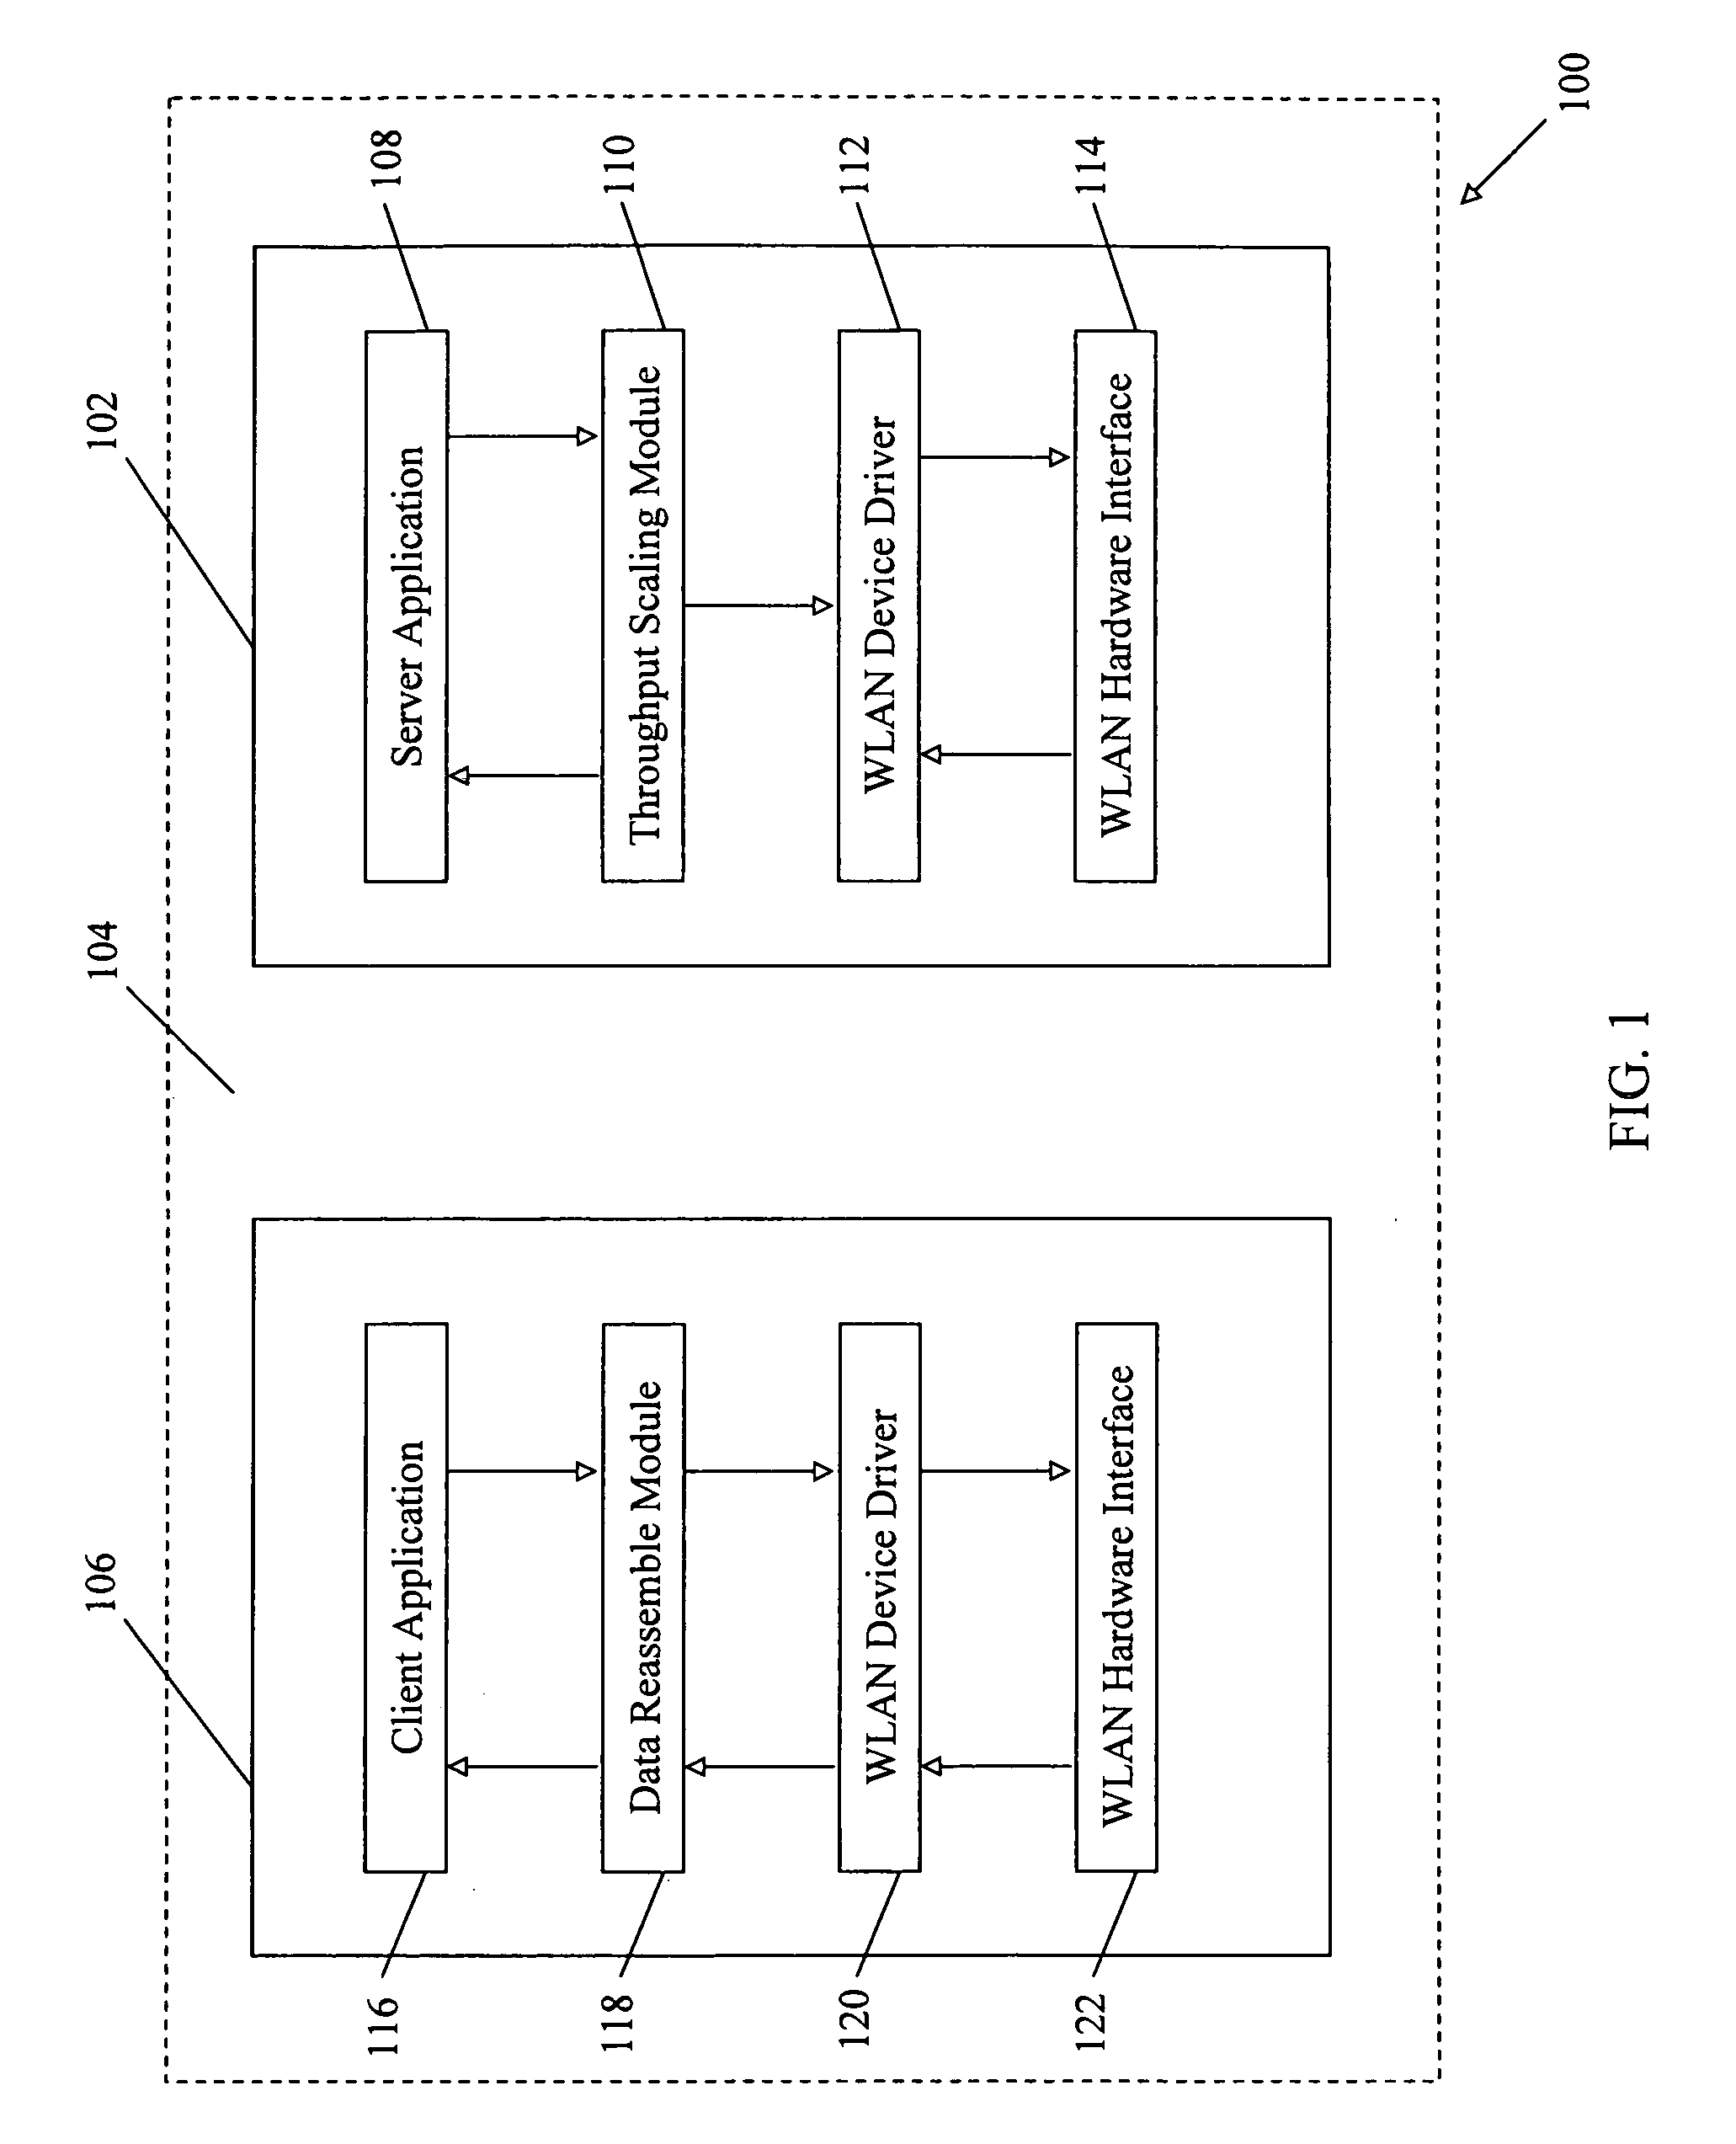 System and method for robust data loss recovery in a wireless local area network